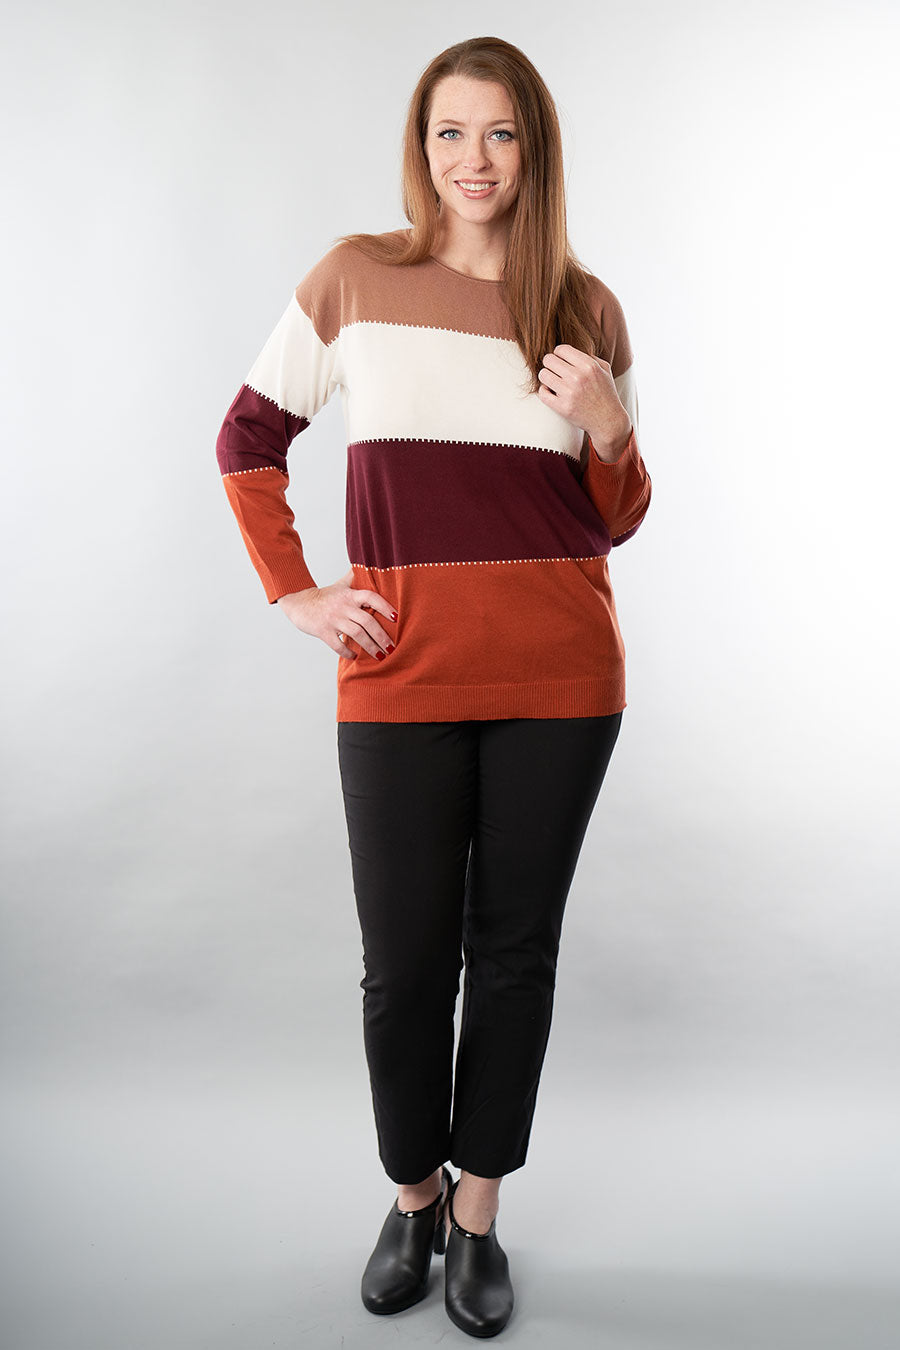 Fully Capable Long Sleeve Top Profile